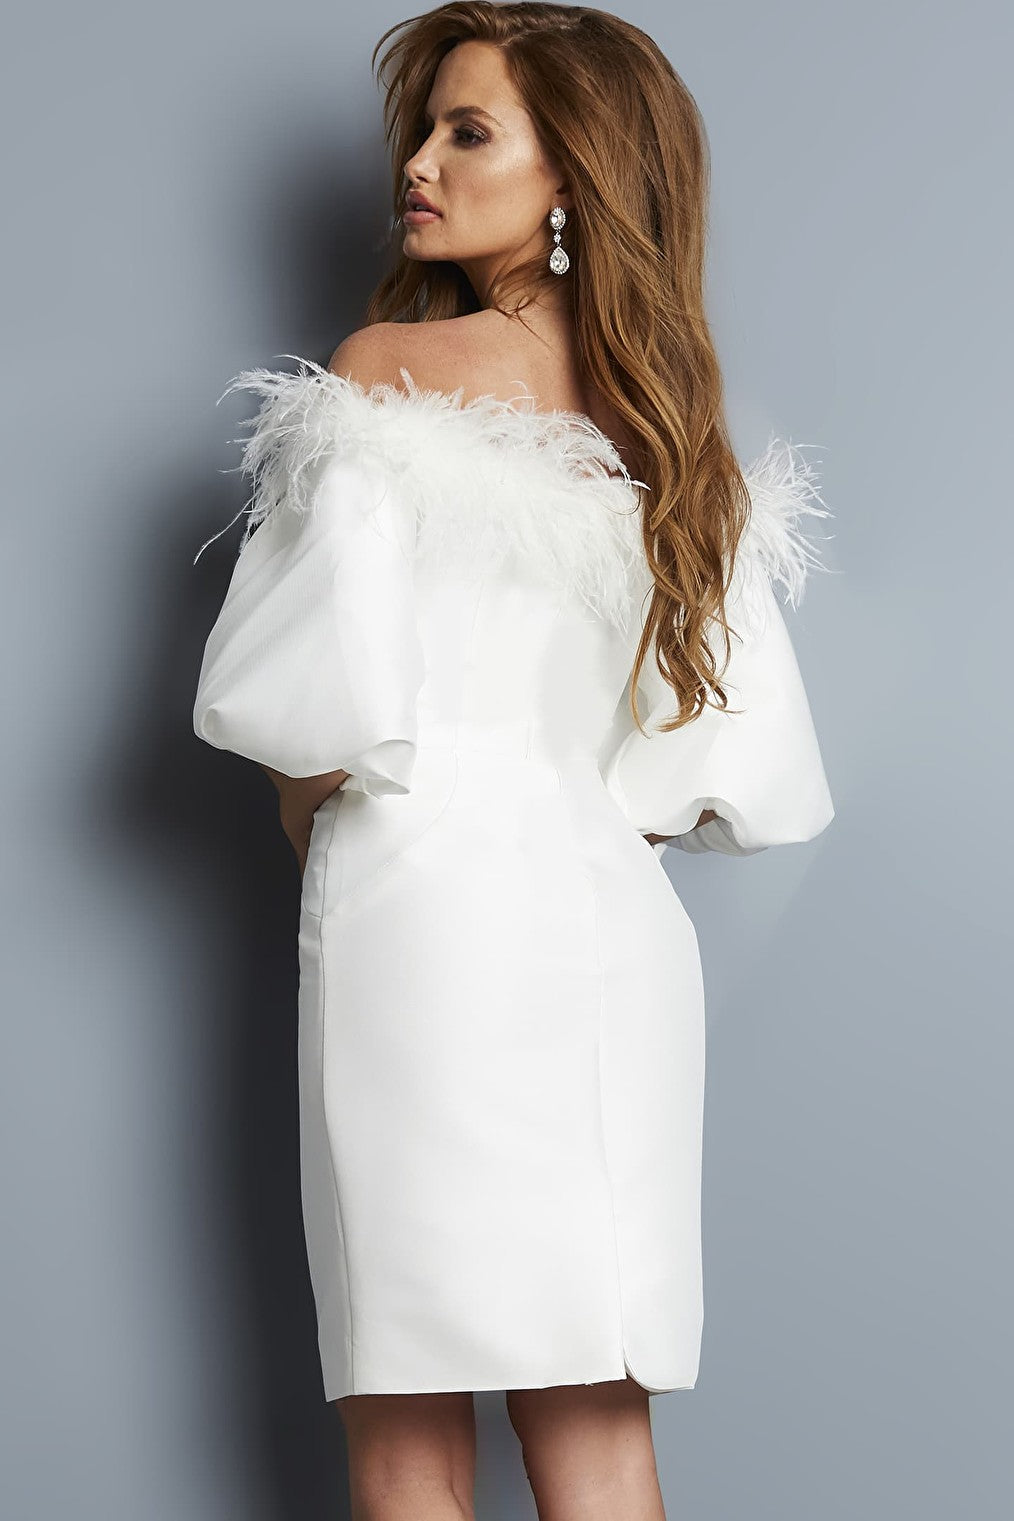 white dress with feathers 08211